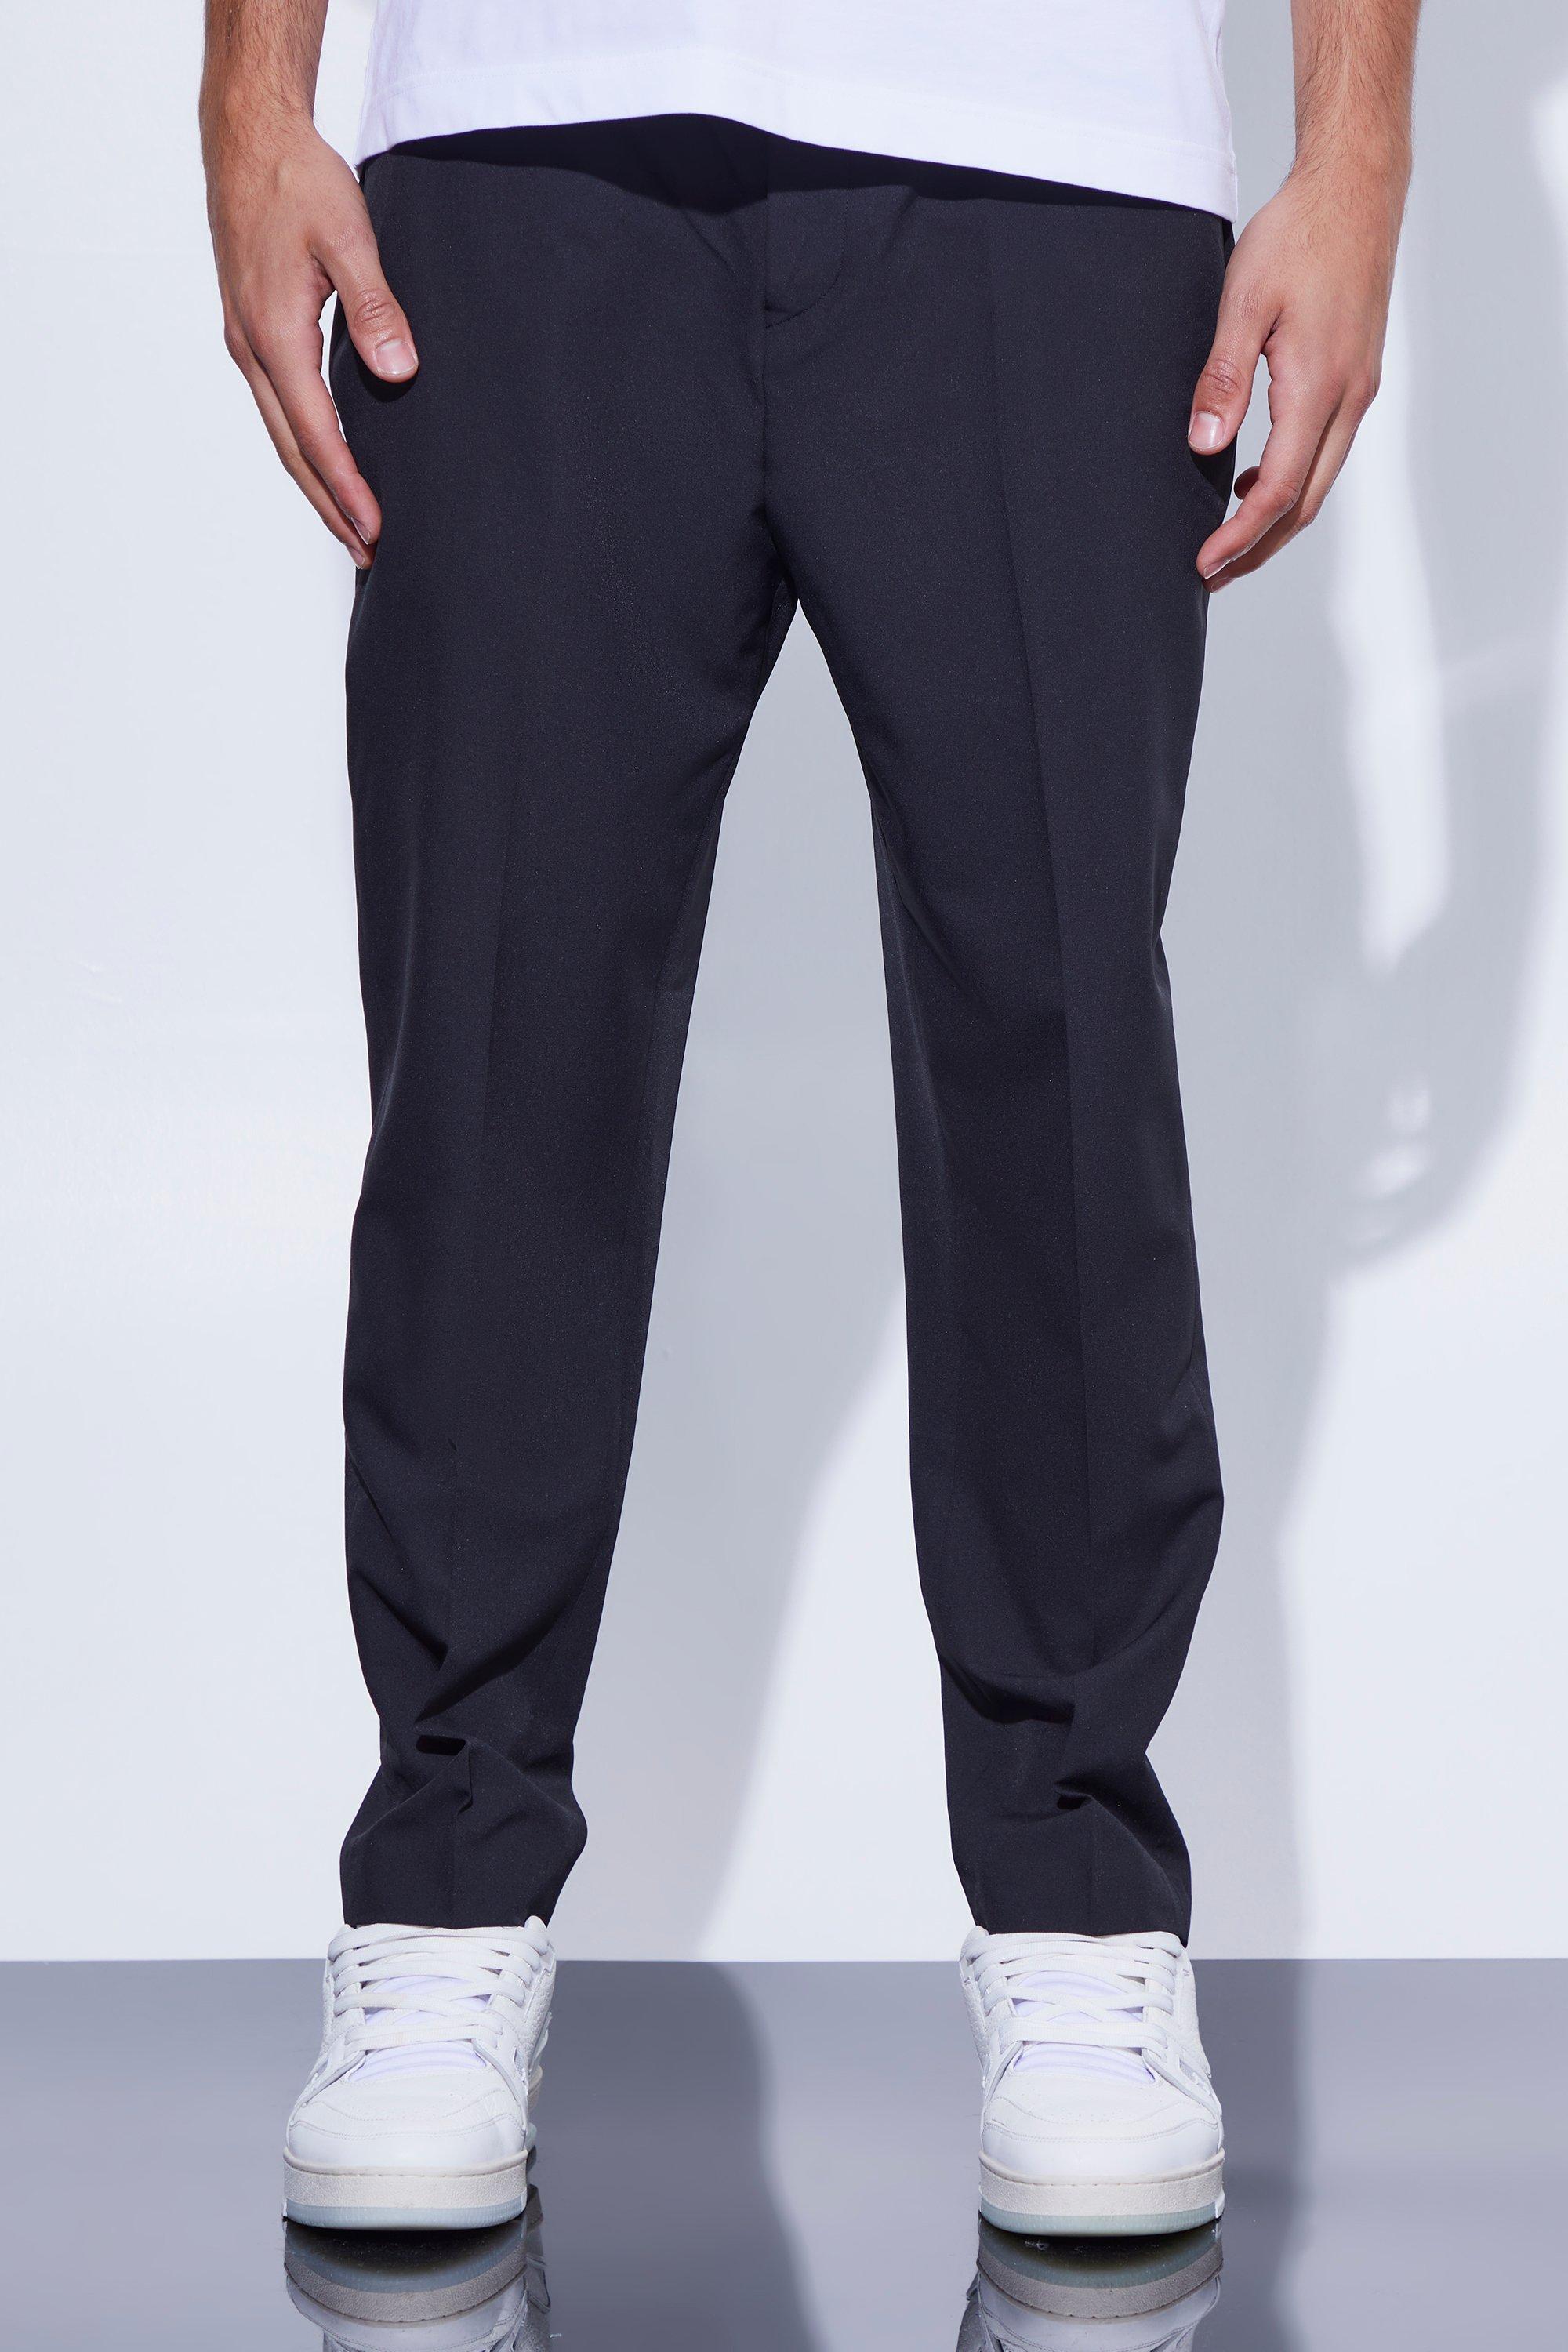 SANDRO mid-rise Tapered Trousers - Farfetch